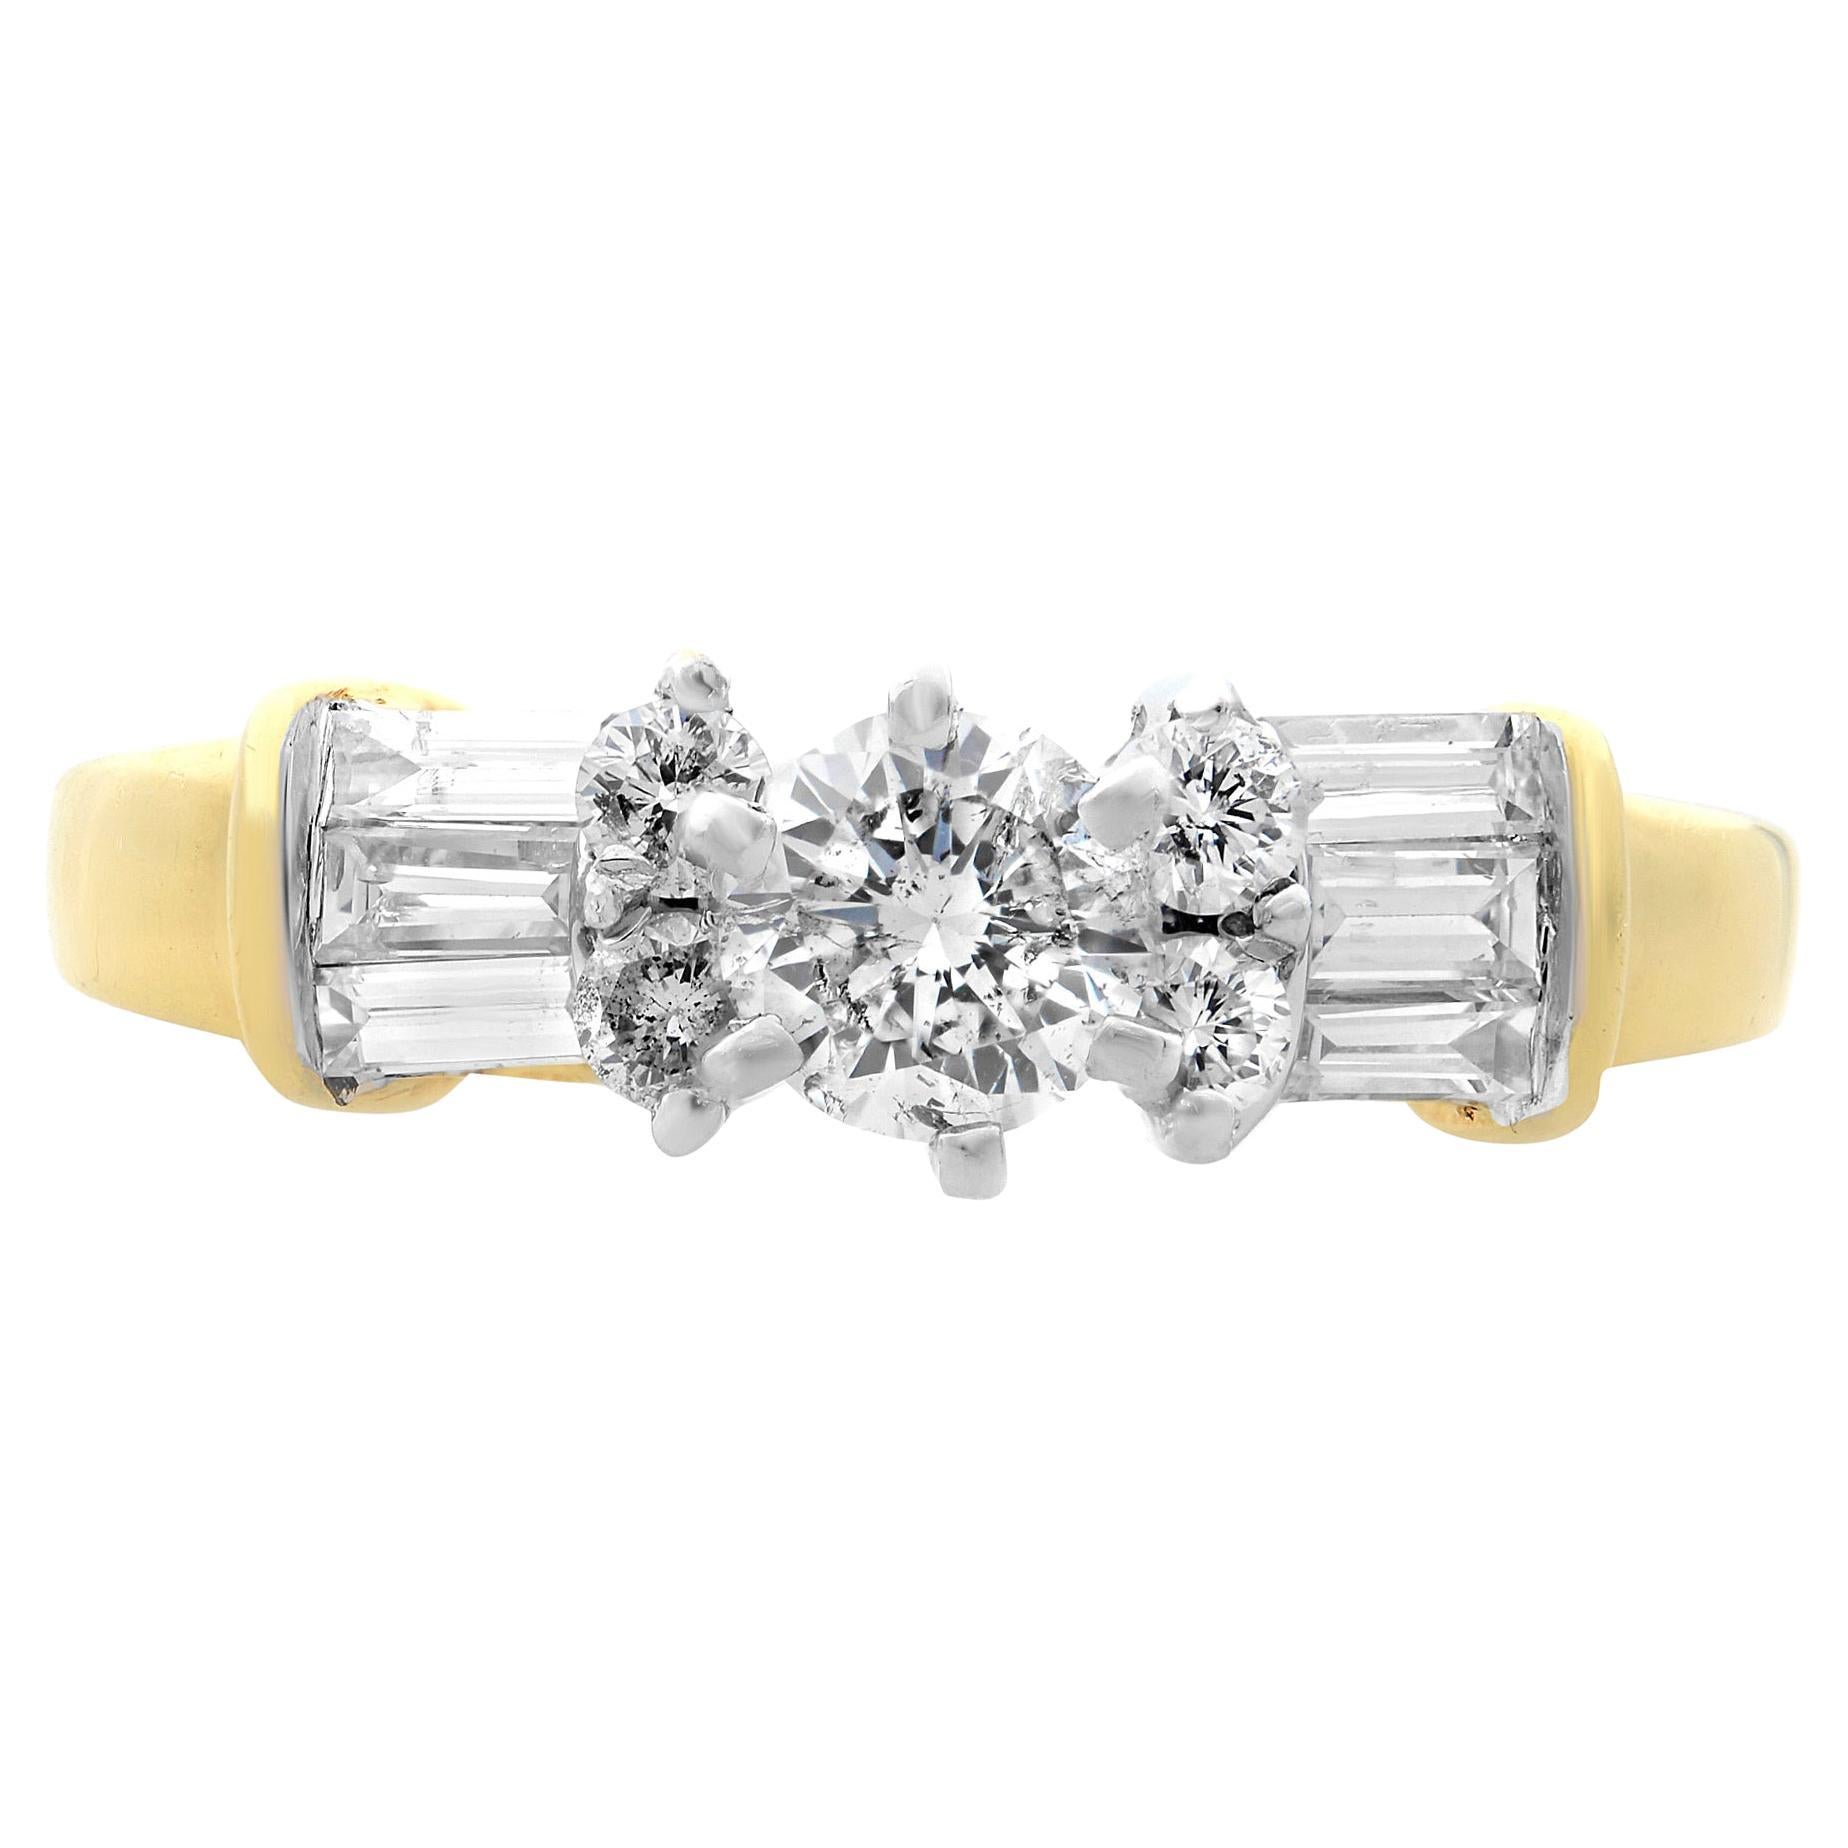 This beautiful ladies engagement ring is crafted in 14k yellow and white gold. It features a center prong set round brilliant cut diamond with baguette and round cut diamonds on each side. Total diamond weight: 1.00 carat. Diamond quality: H color